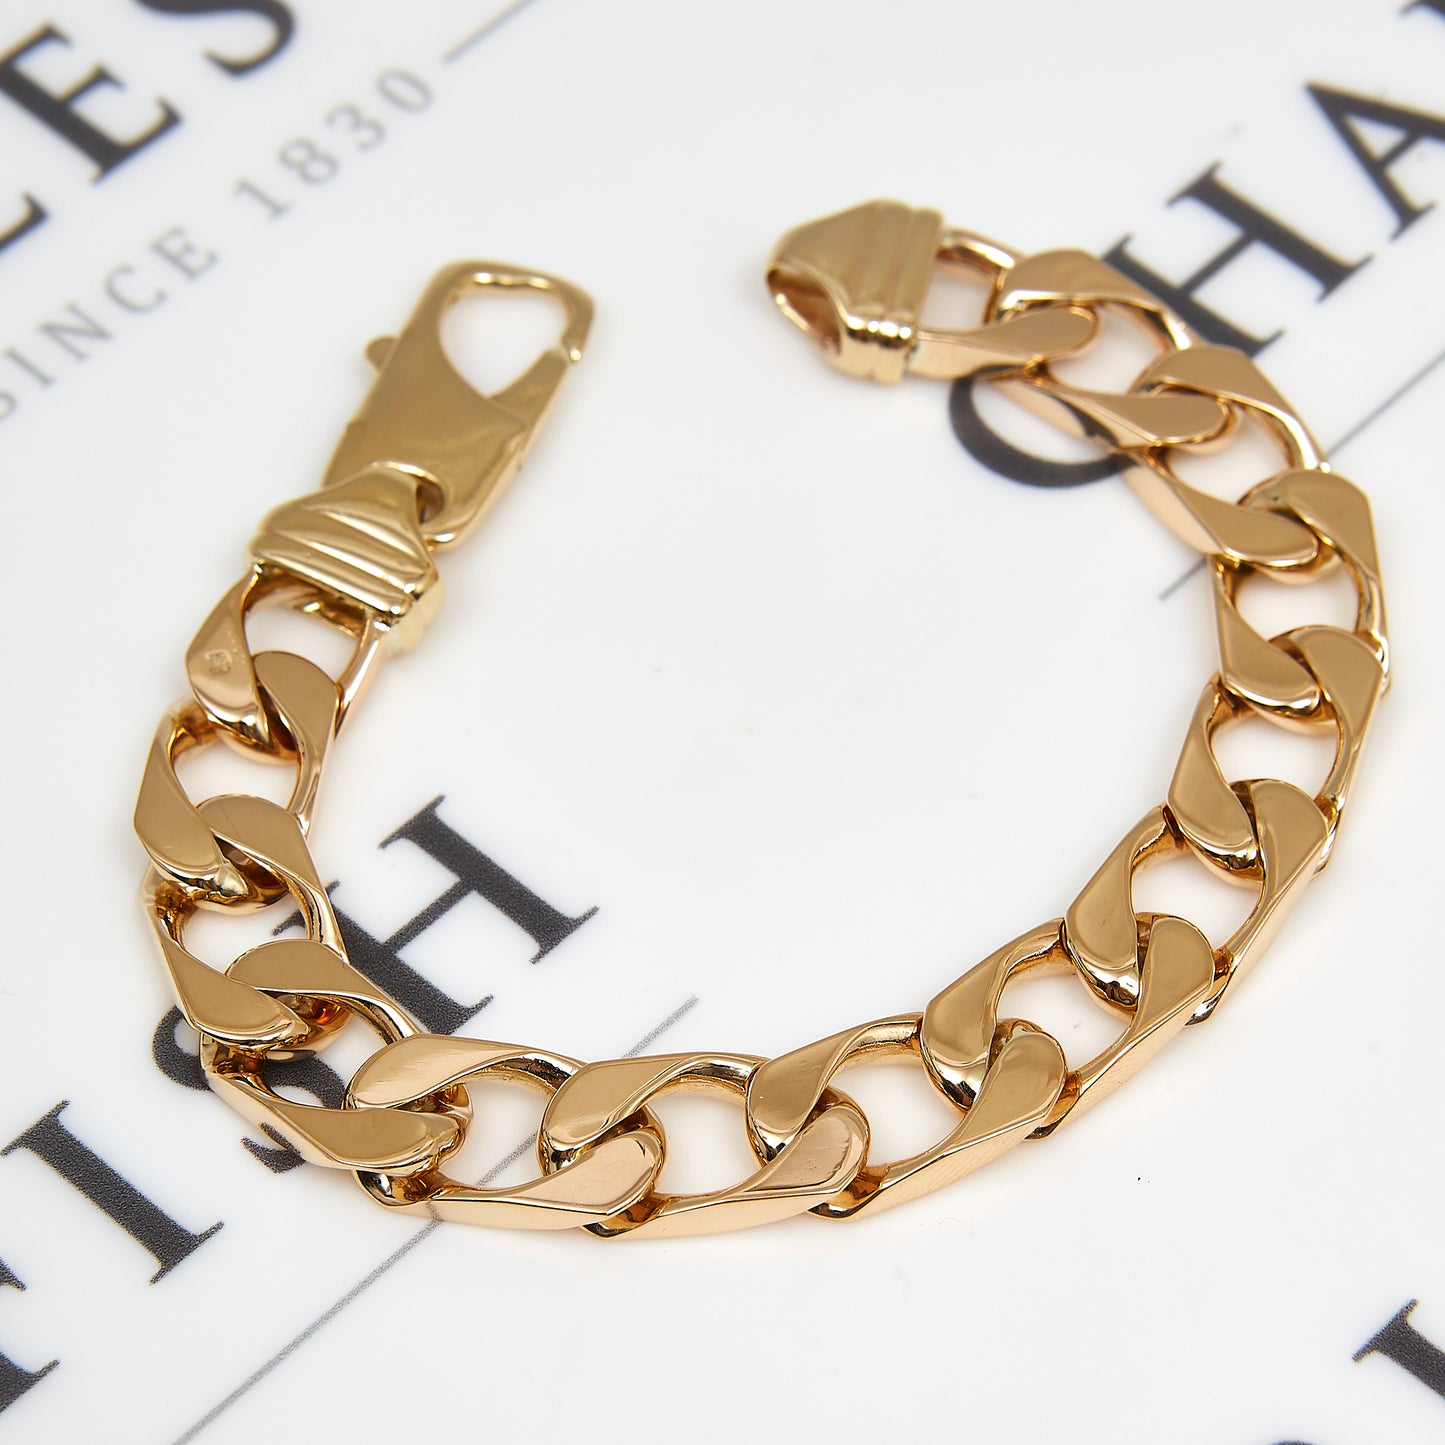 Pre-Owned 9ct Yellow Gold Gent Curb Chain Bracelet